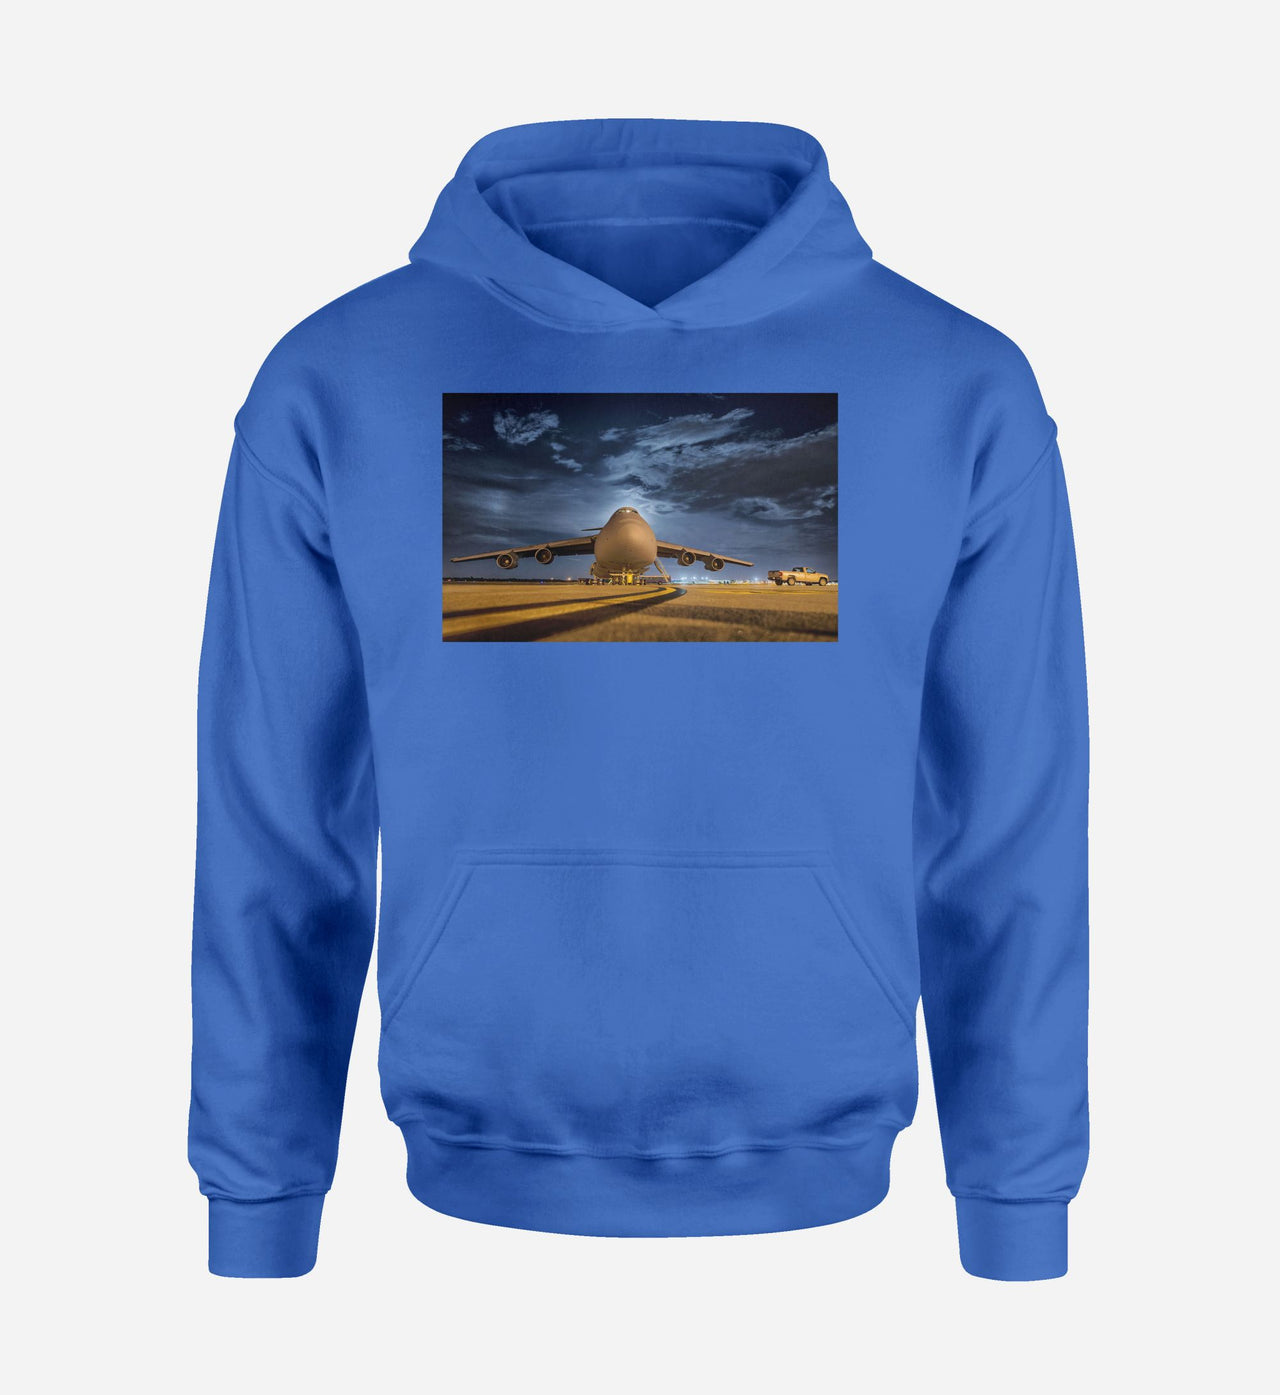 Amazing Military Aircraft at Night Designed Hoodies